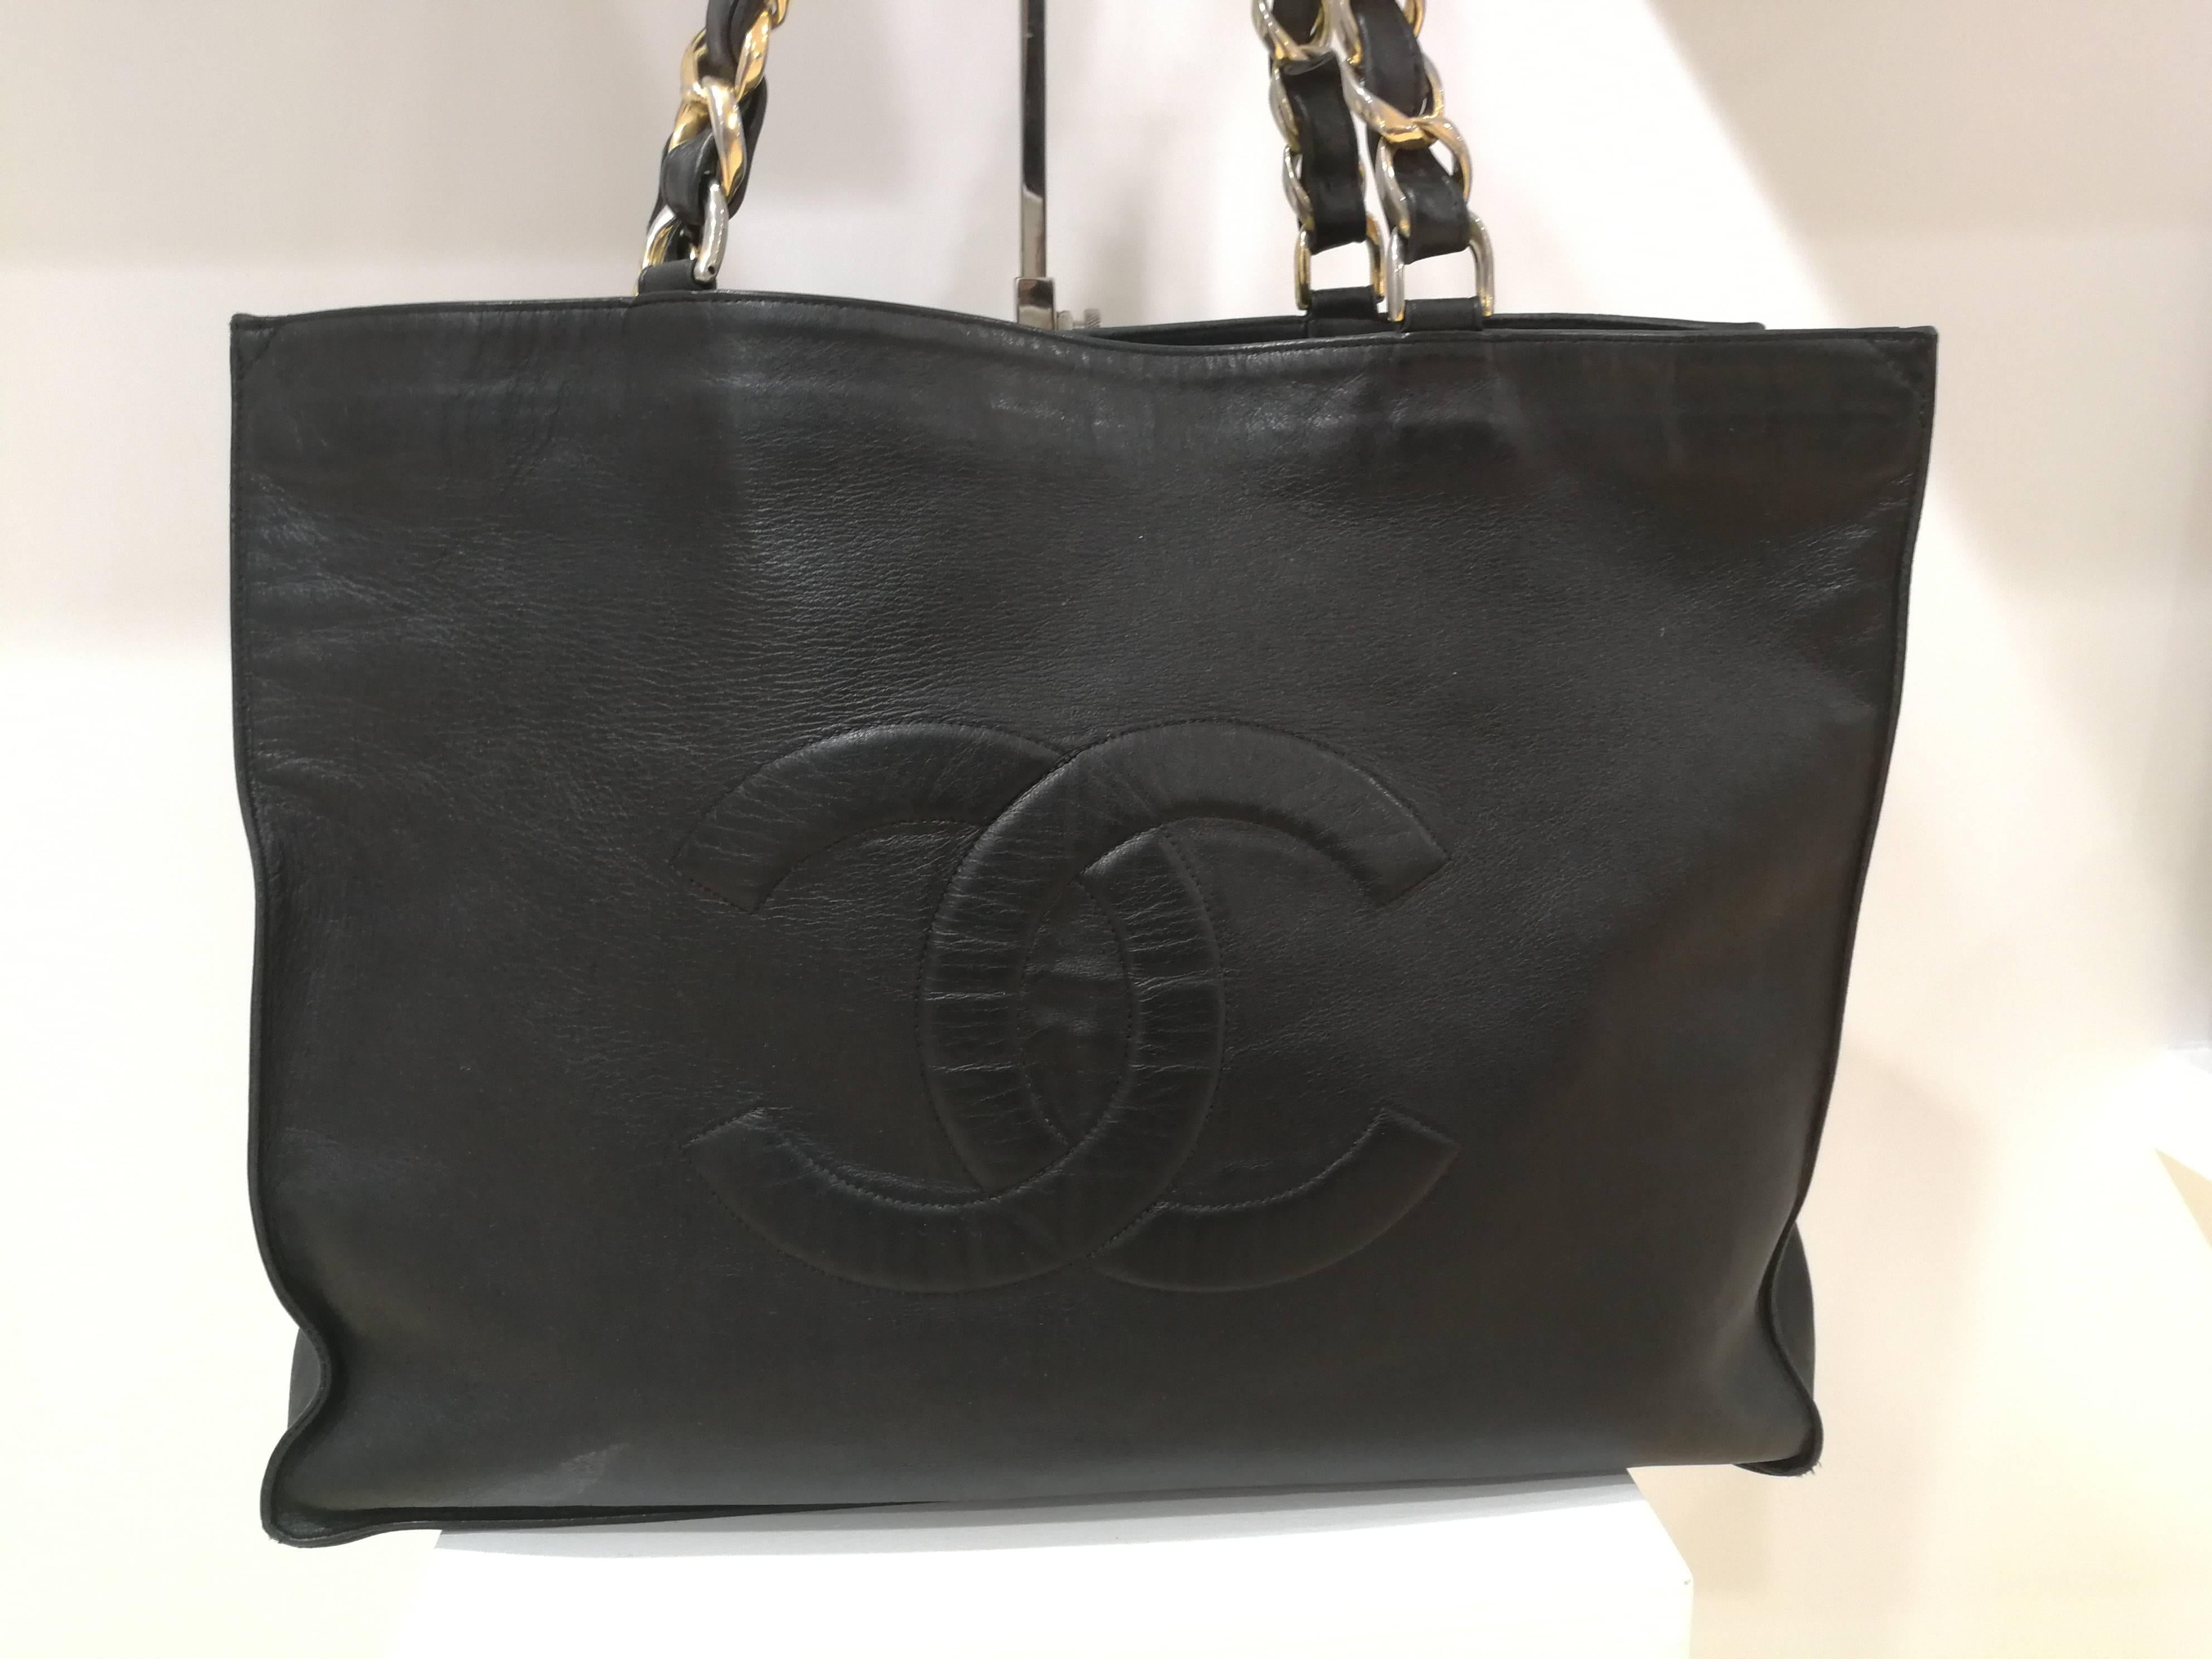 Chanel Black Leather Shopper Bag

gold tone hardware for the chain

CC logo on the front 

Totally made in France